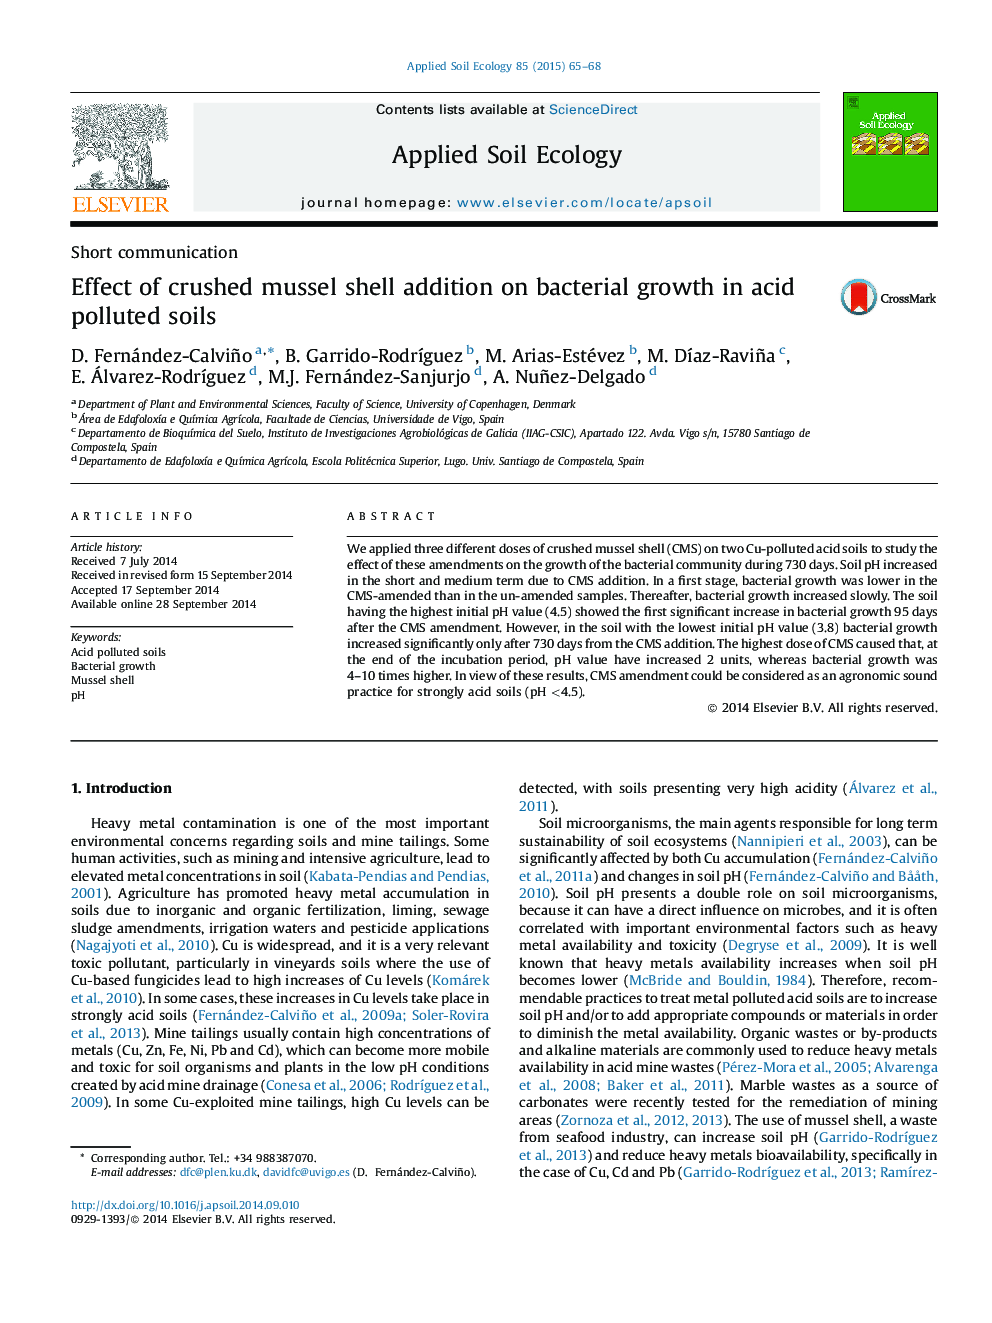 Effect of crushed mussel shell addition on bacterial growth in acid polluted soils